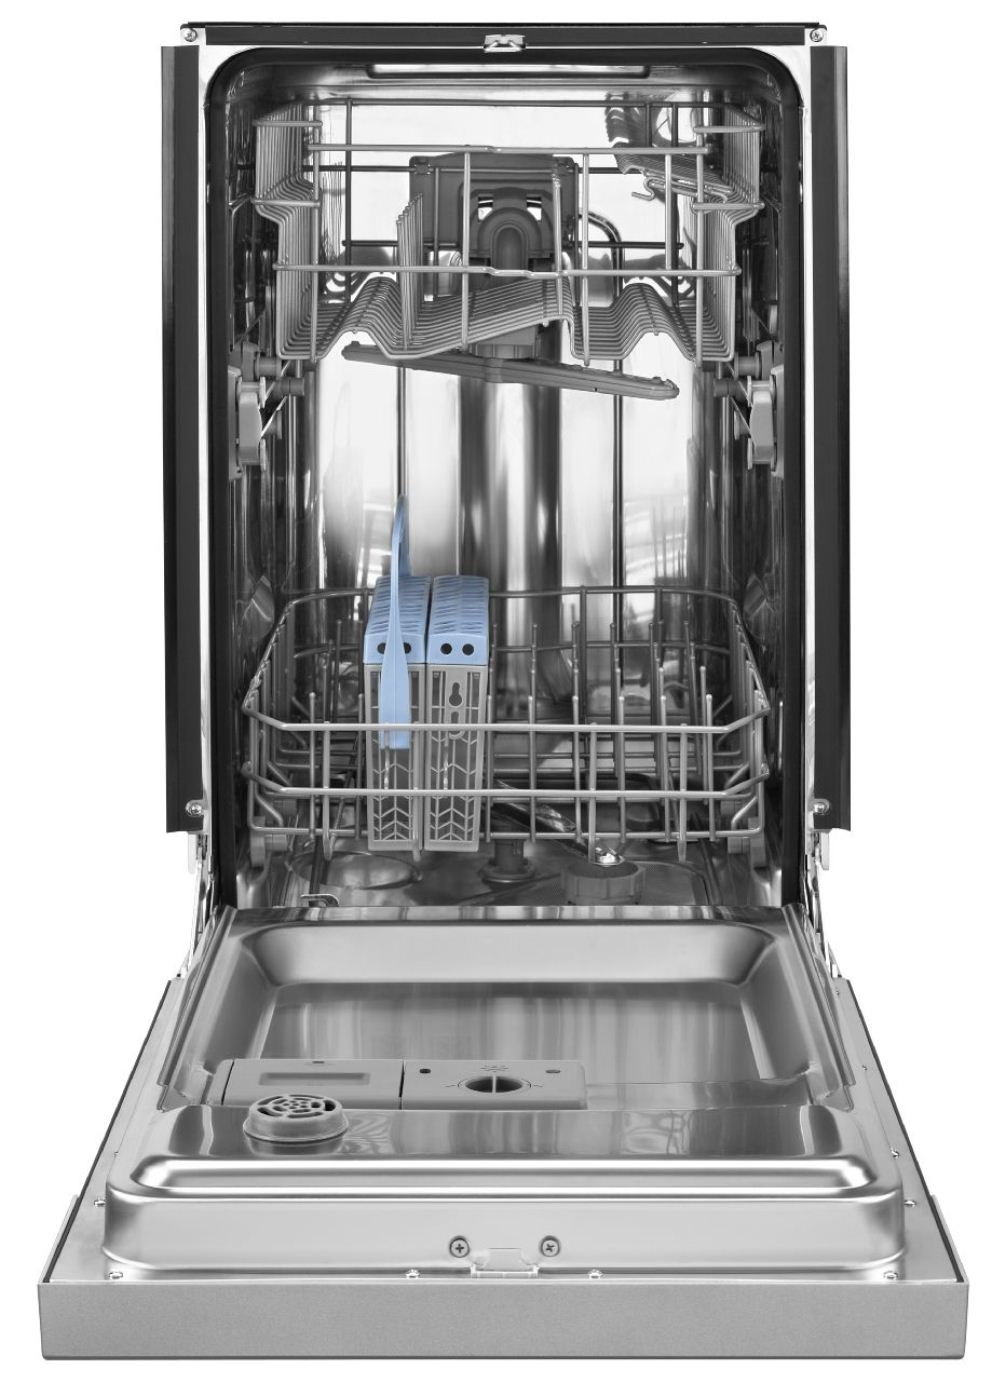 Whirlpool 18-inch Built-in Dishwasher with Stainless Steel Tub WDF518S